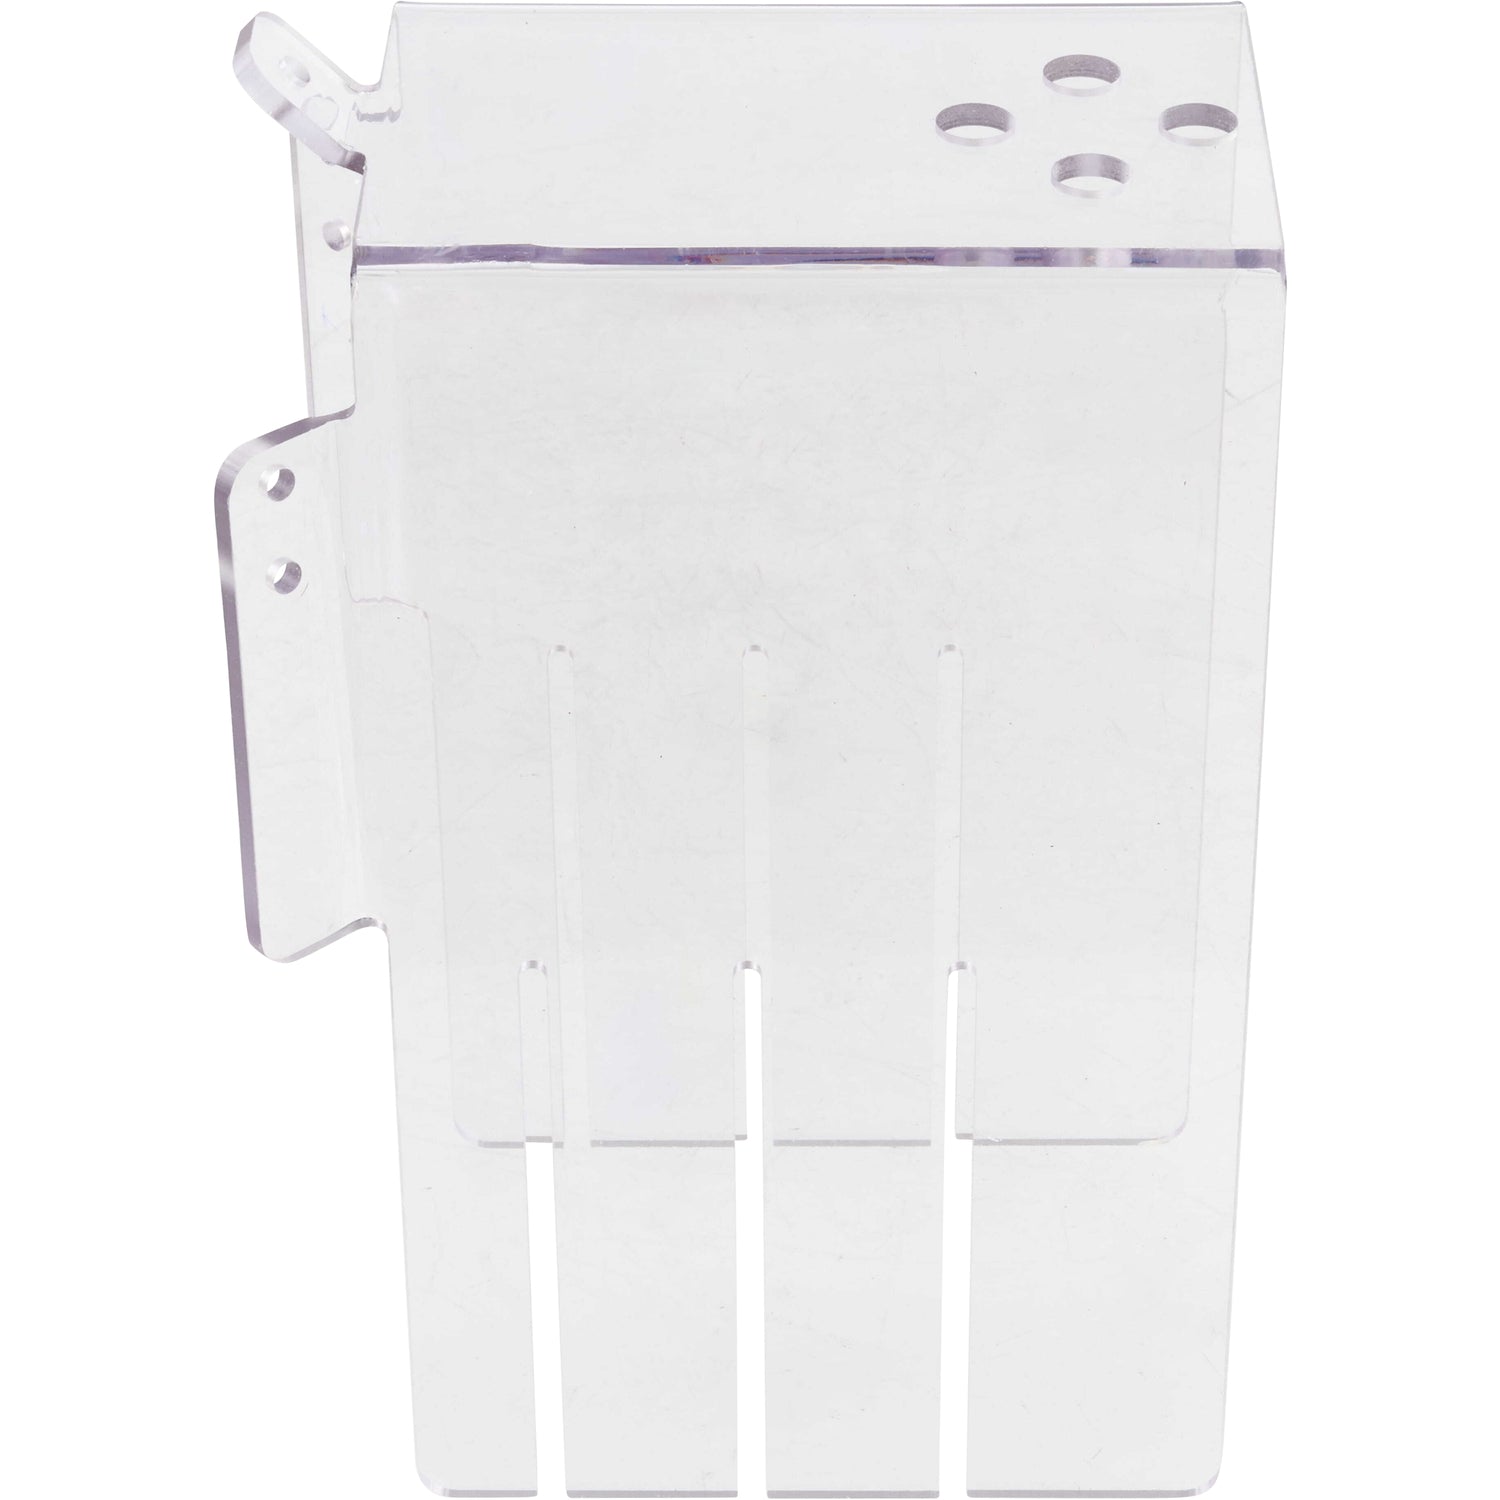 Bent, rectangular, clear polycarbonate part with multiple holes shown on a white background. 